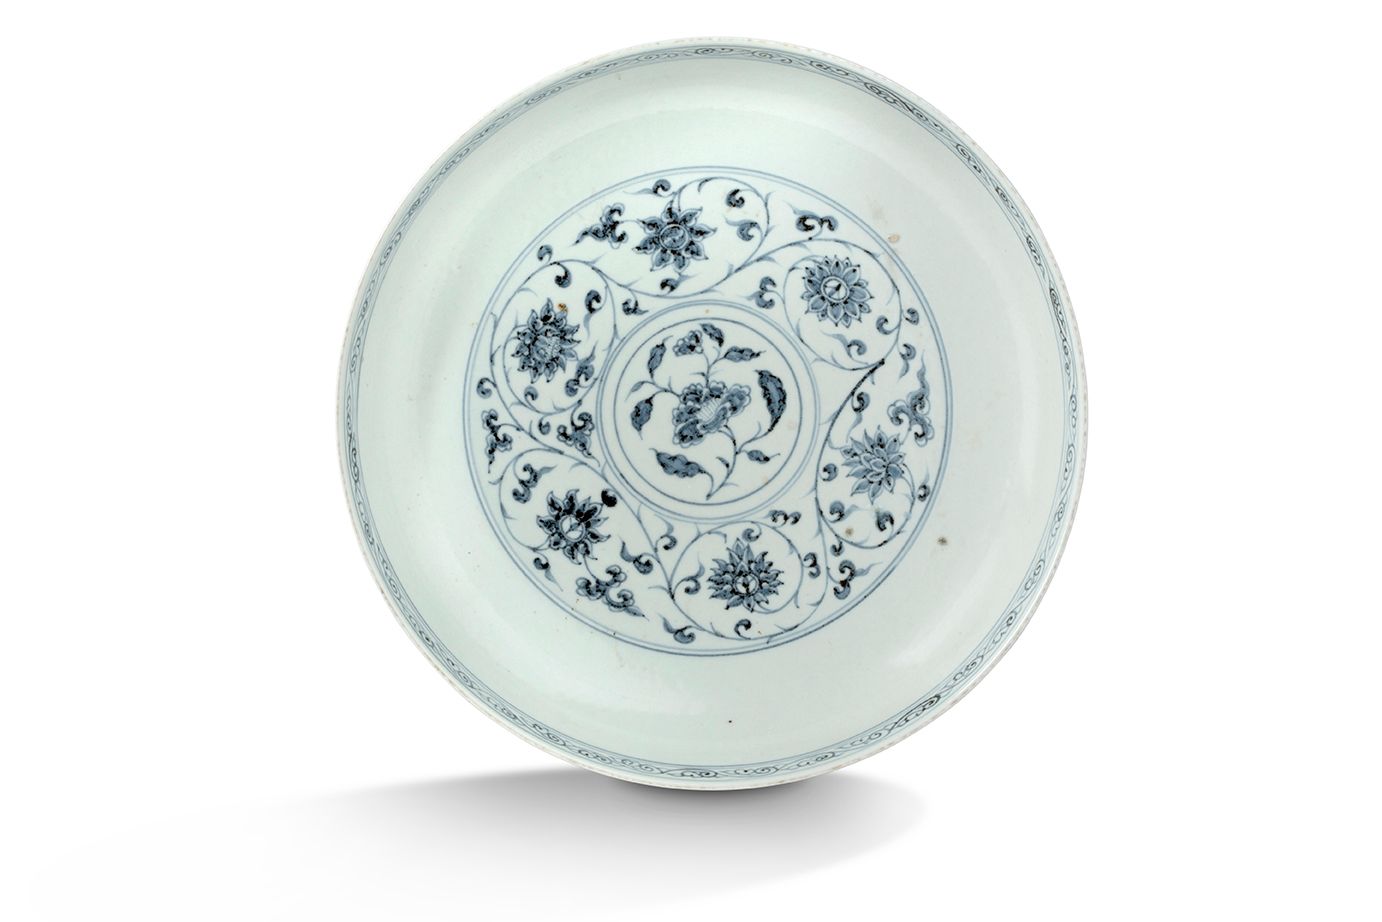 CHINE DANS LE STYLE DU XIVe SIÈCLE Dish
Blue-white porcelain decorated with came&hellip;